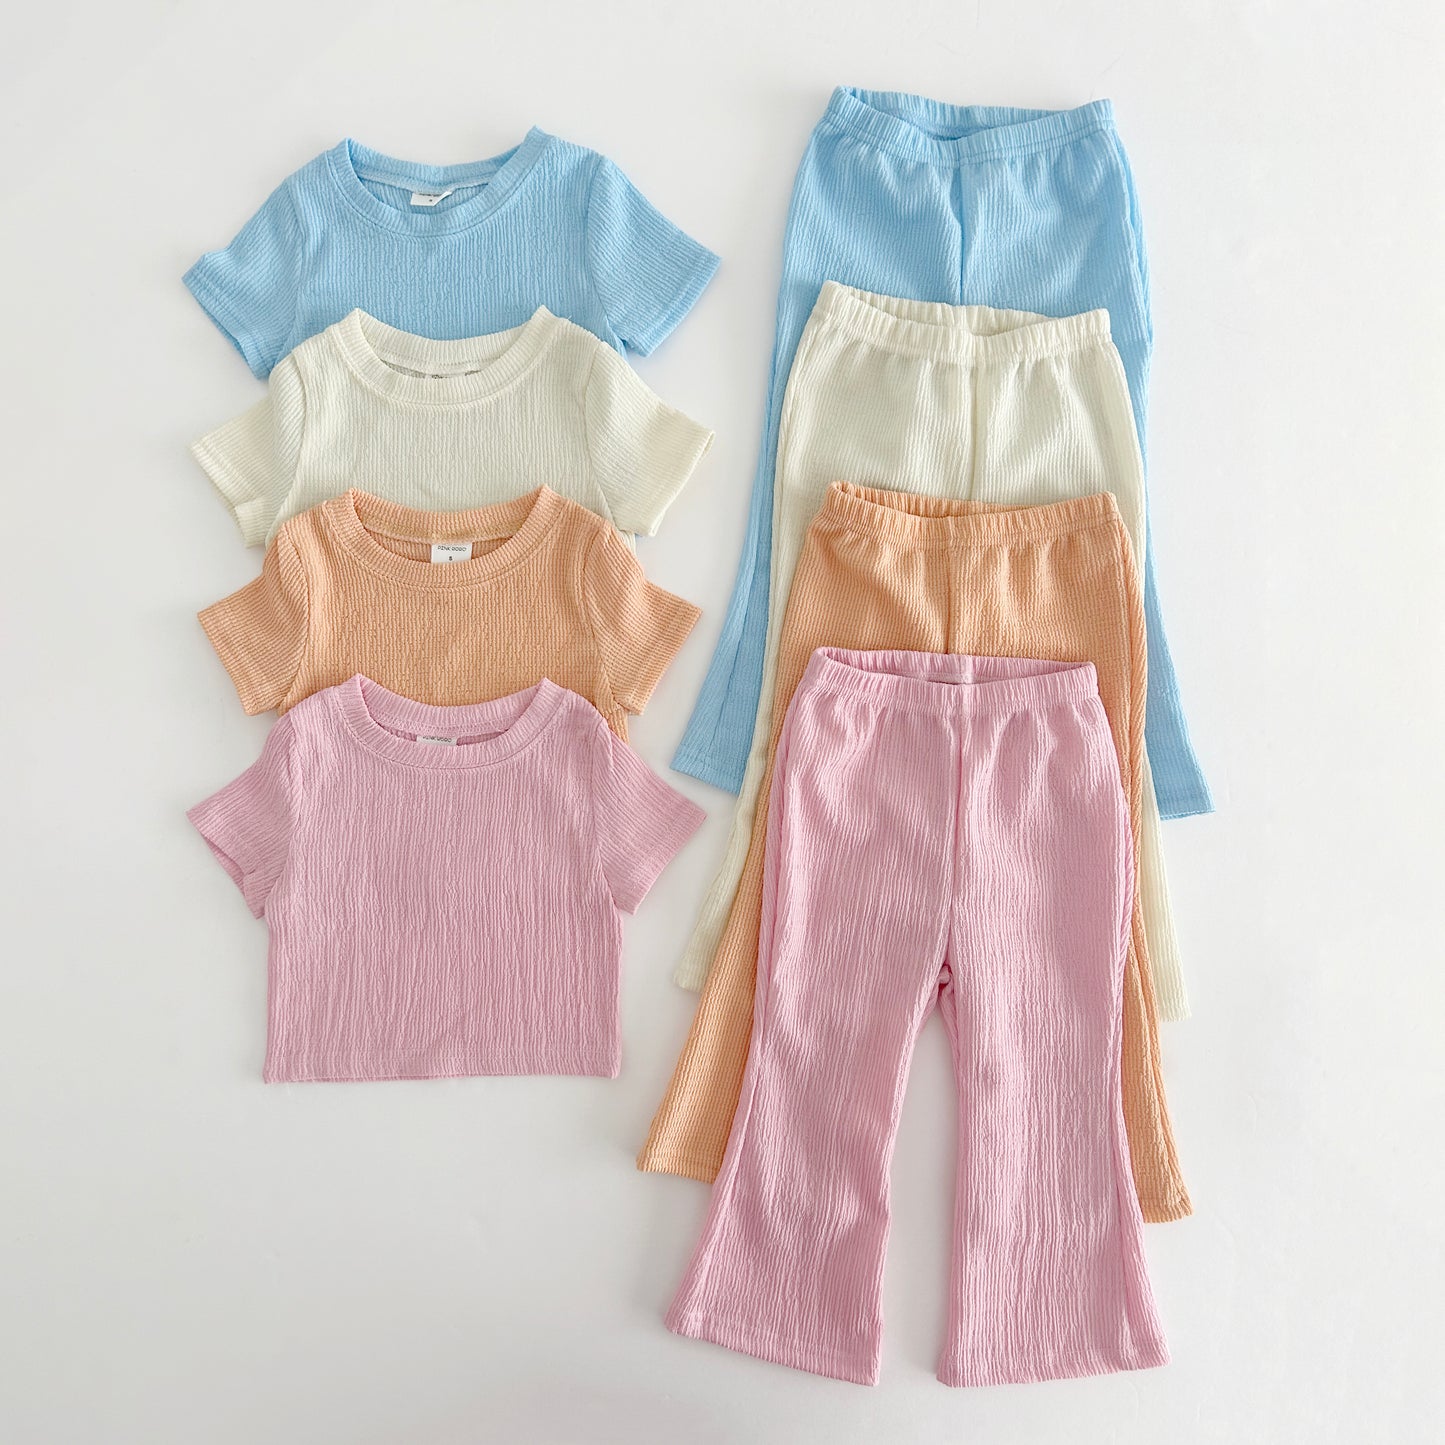 Kids Cool Short Sleeve Top and Flare Pants Set (2-7y) - 4 Colors